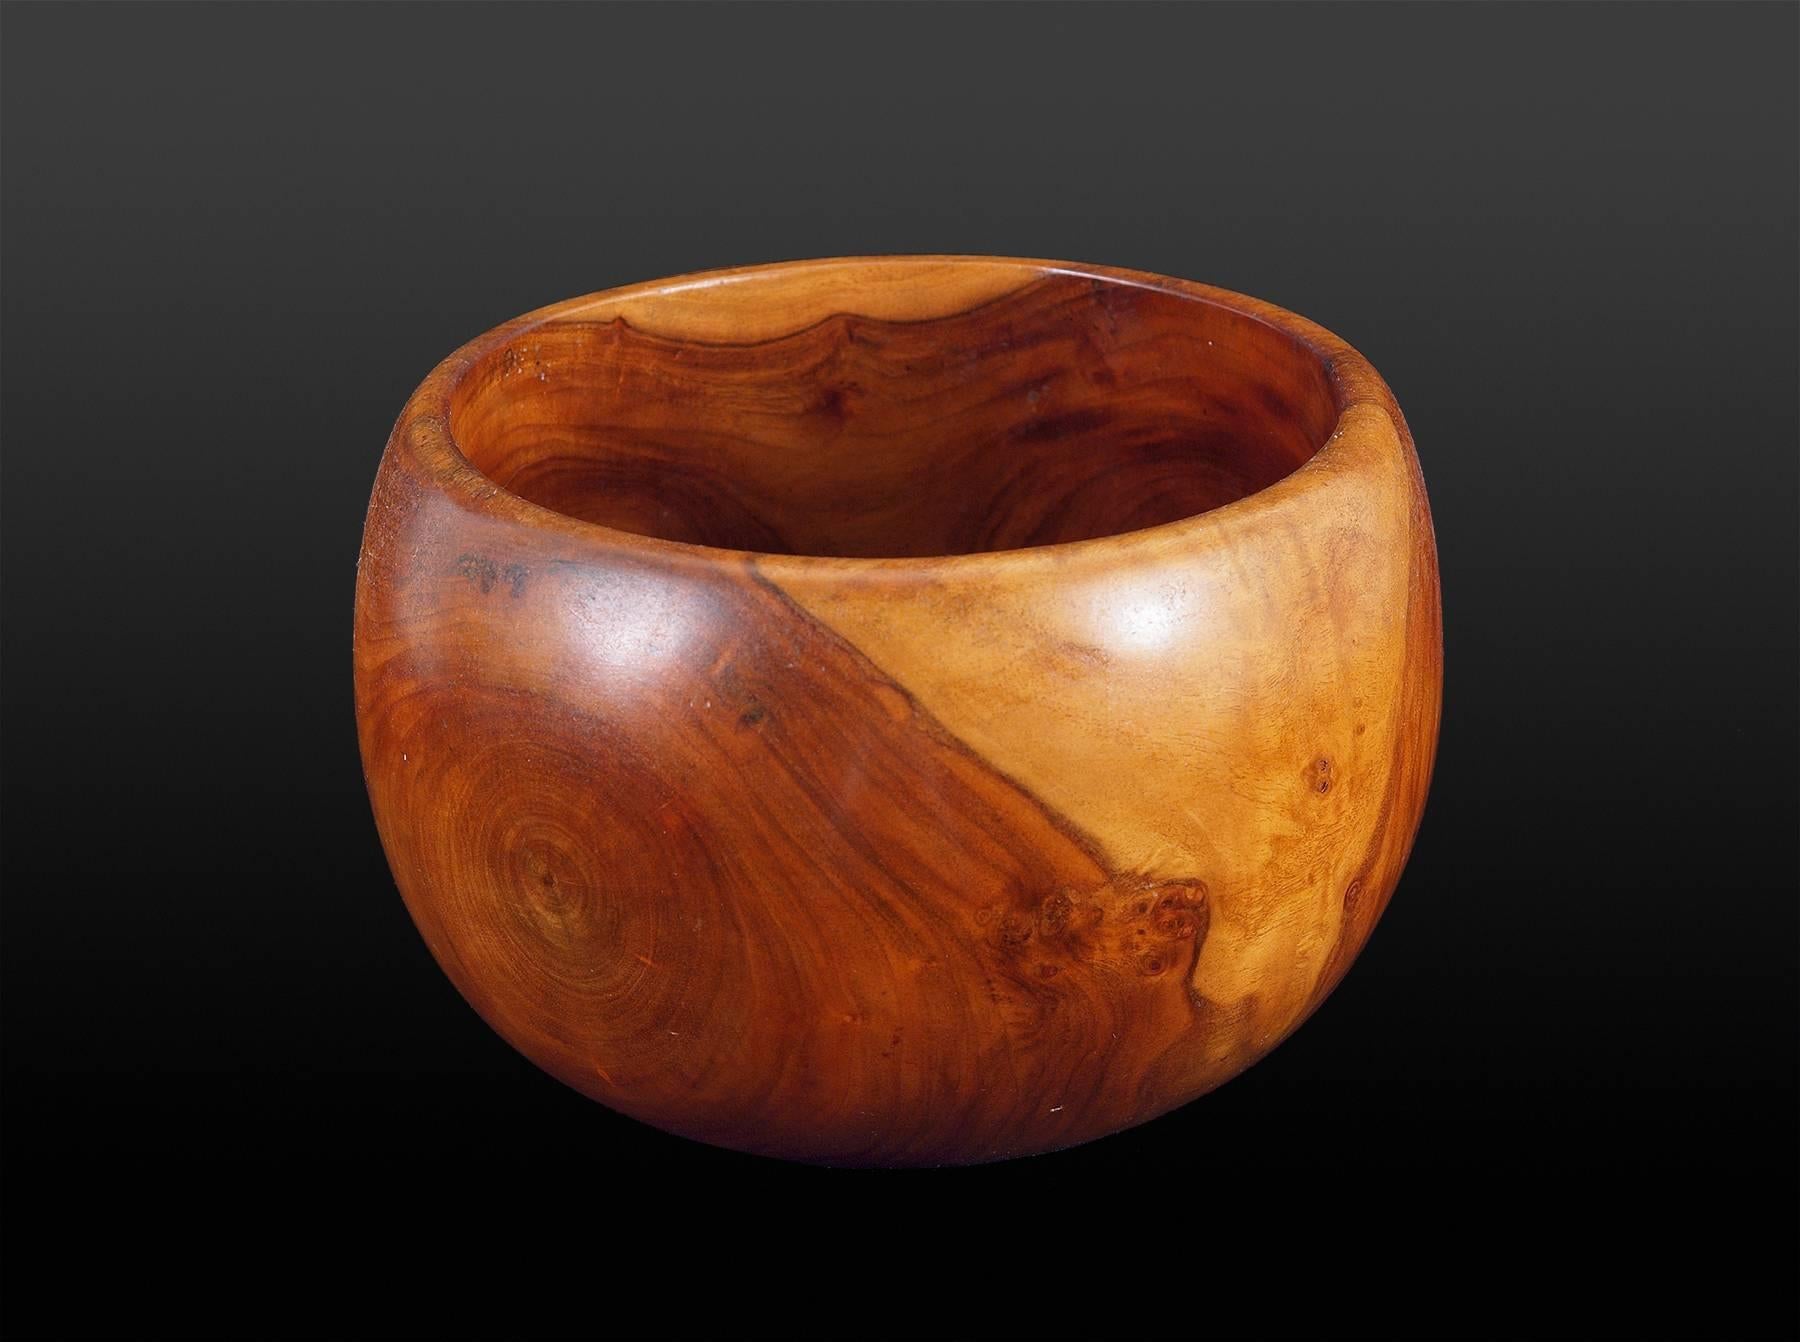 Constructed of a single piece of Koa wood and polished.

Expedited and International shipping is available; please contact us for an estimate.